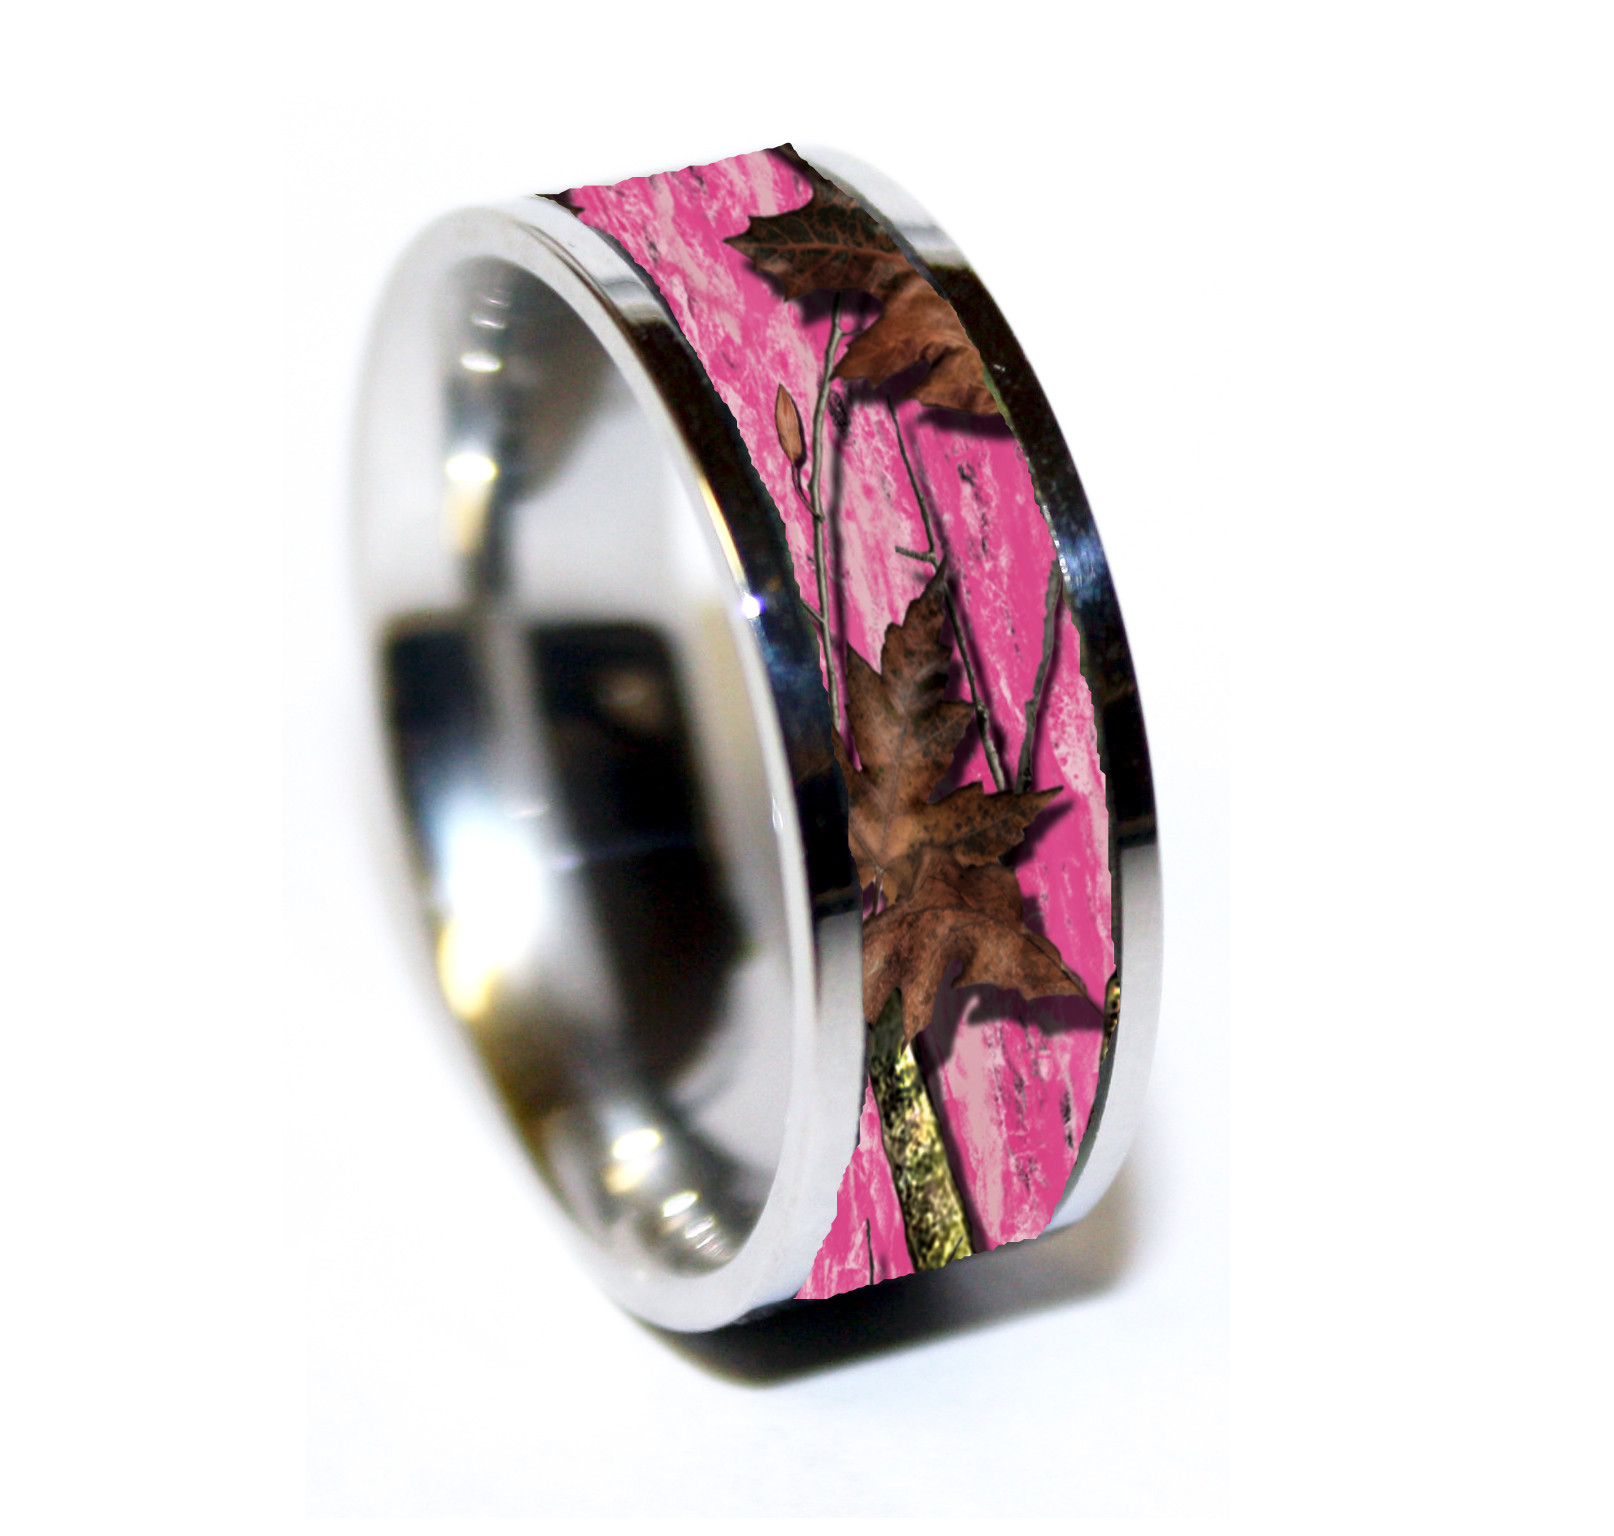 Pink Camouflage Wedding Rings
 PINK CAMO Camouflage Wedding Rings & Camo Rings